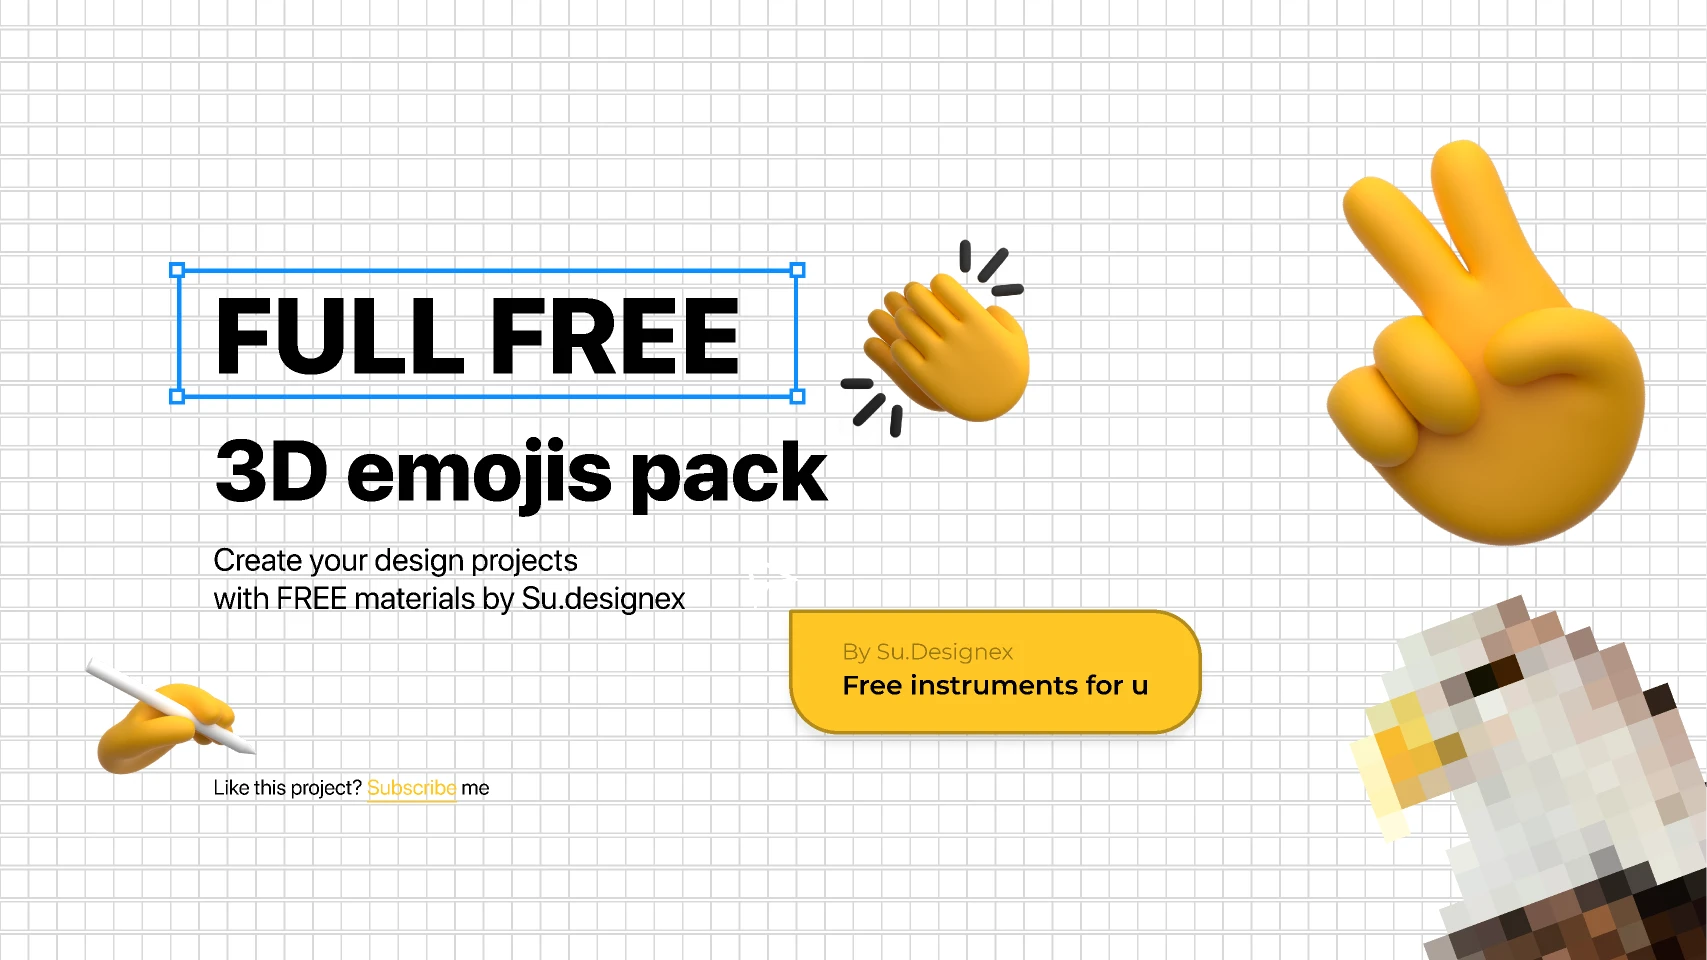 FREE 3D emojis pack for Figma and Adobe XD